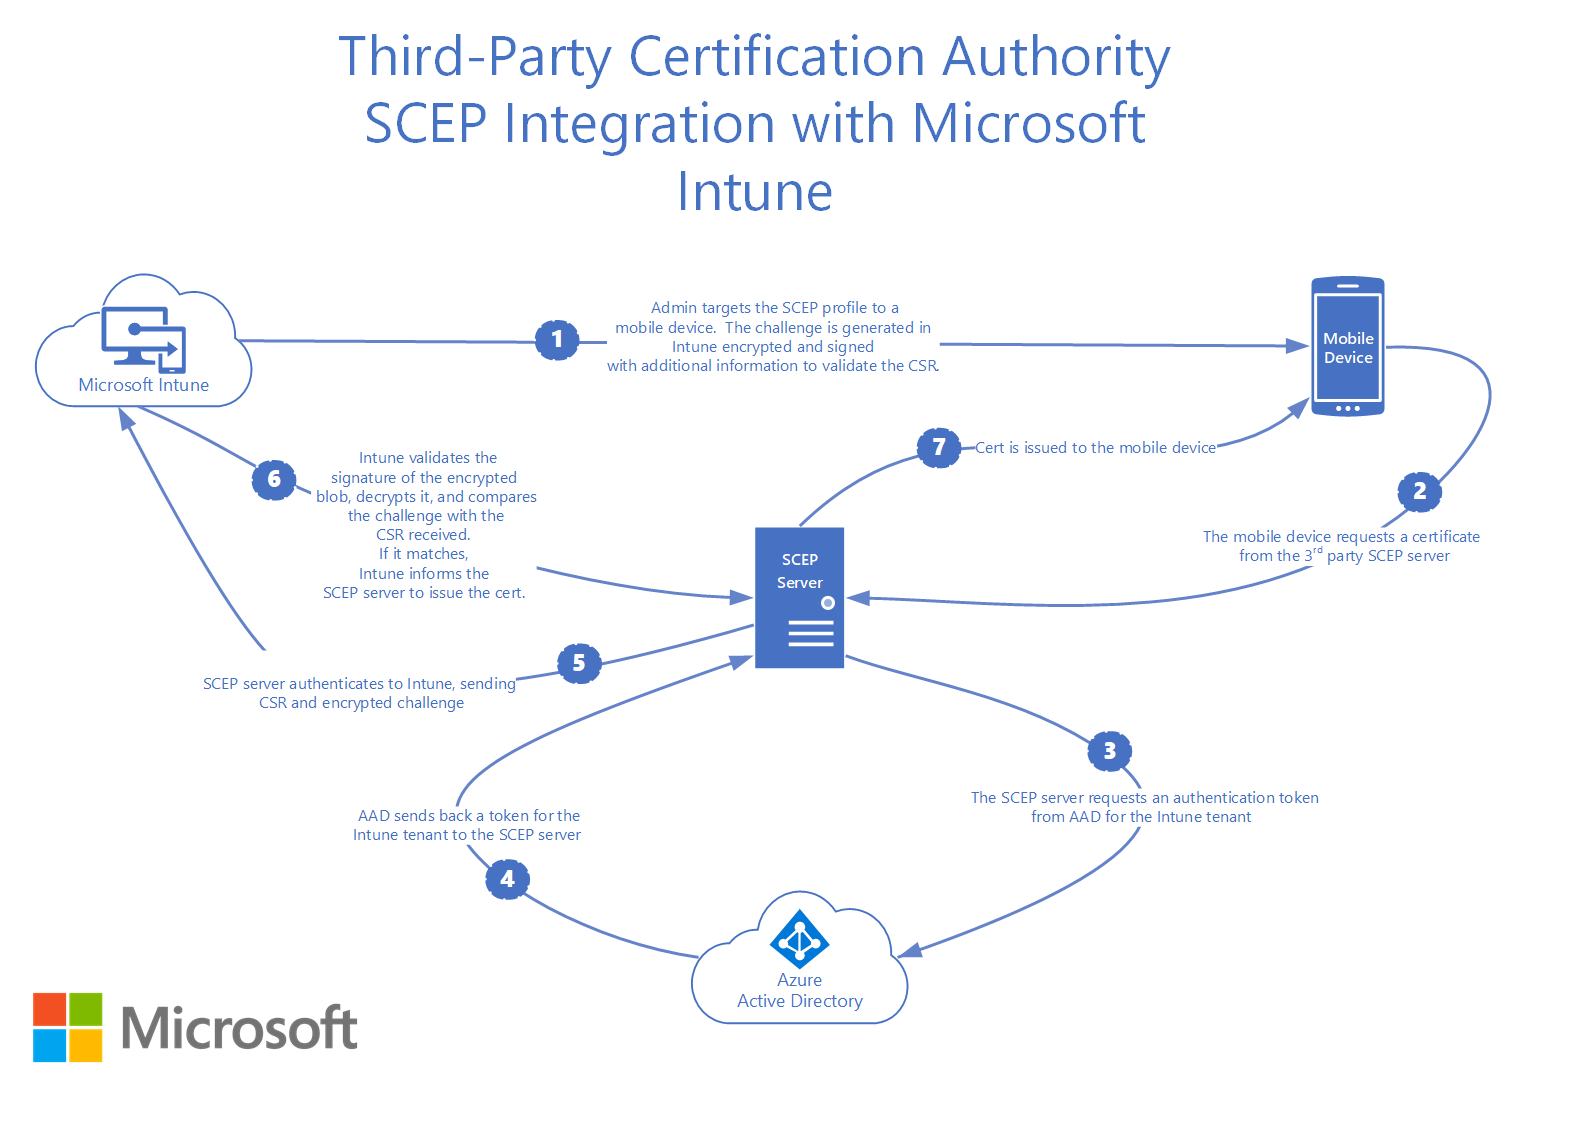 How third party certification authority SCEP integrates with Microsoft Intune